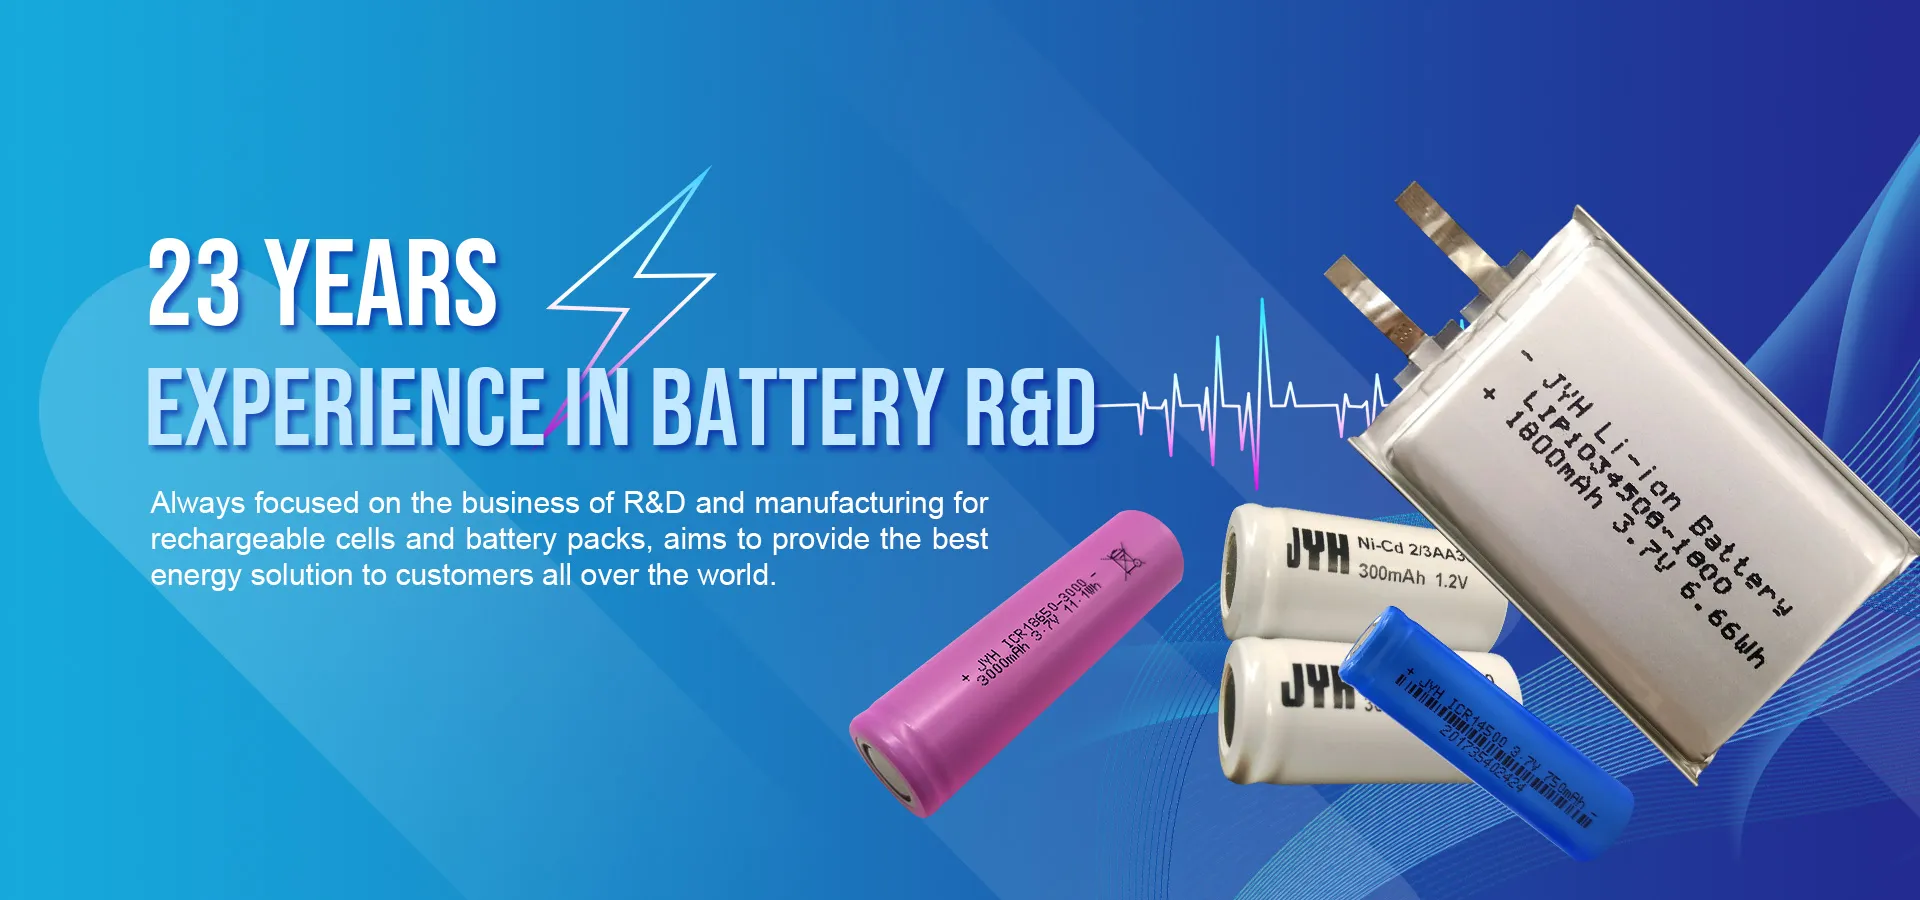 23 Years Experience in Battery R&D